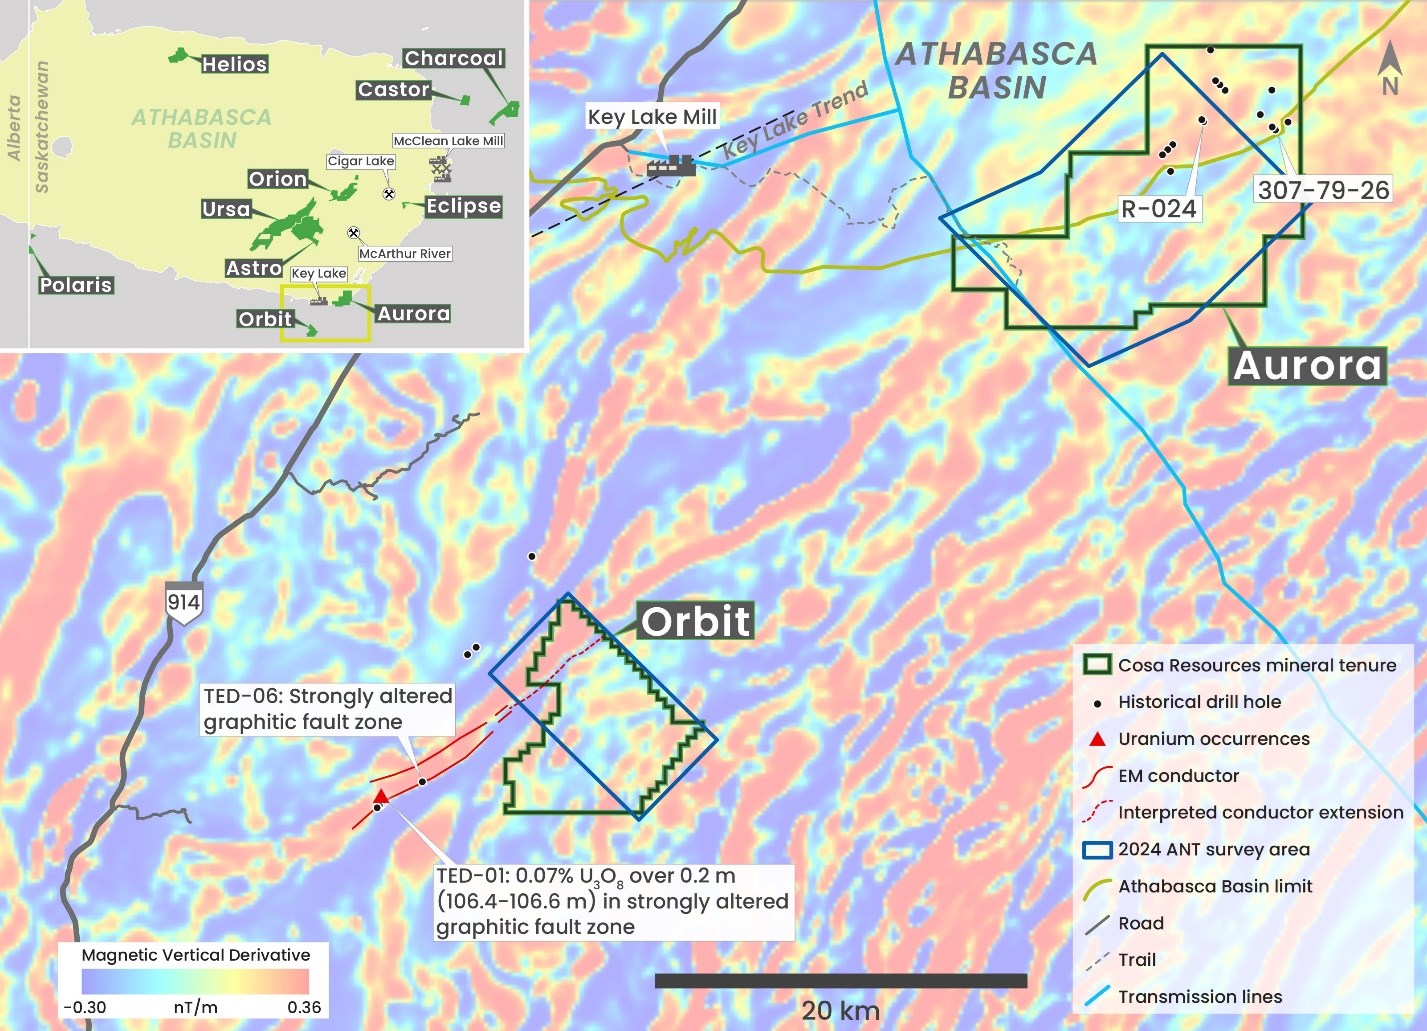 Aurora and Orbit Airborne Cosa Resources Announces Summer Exploration Plans for Athabasca Basin Uranium Projects